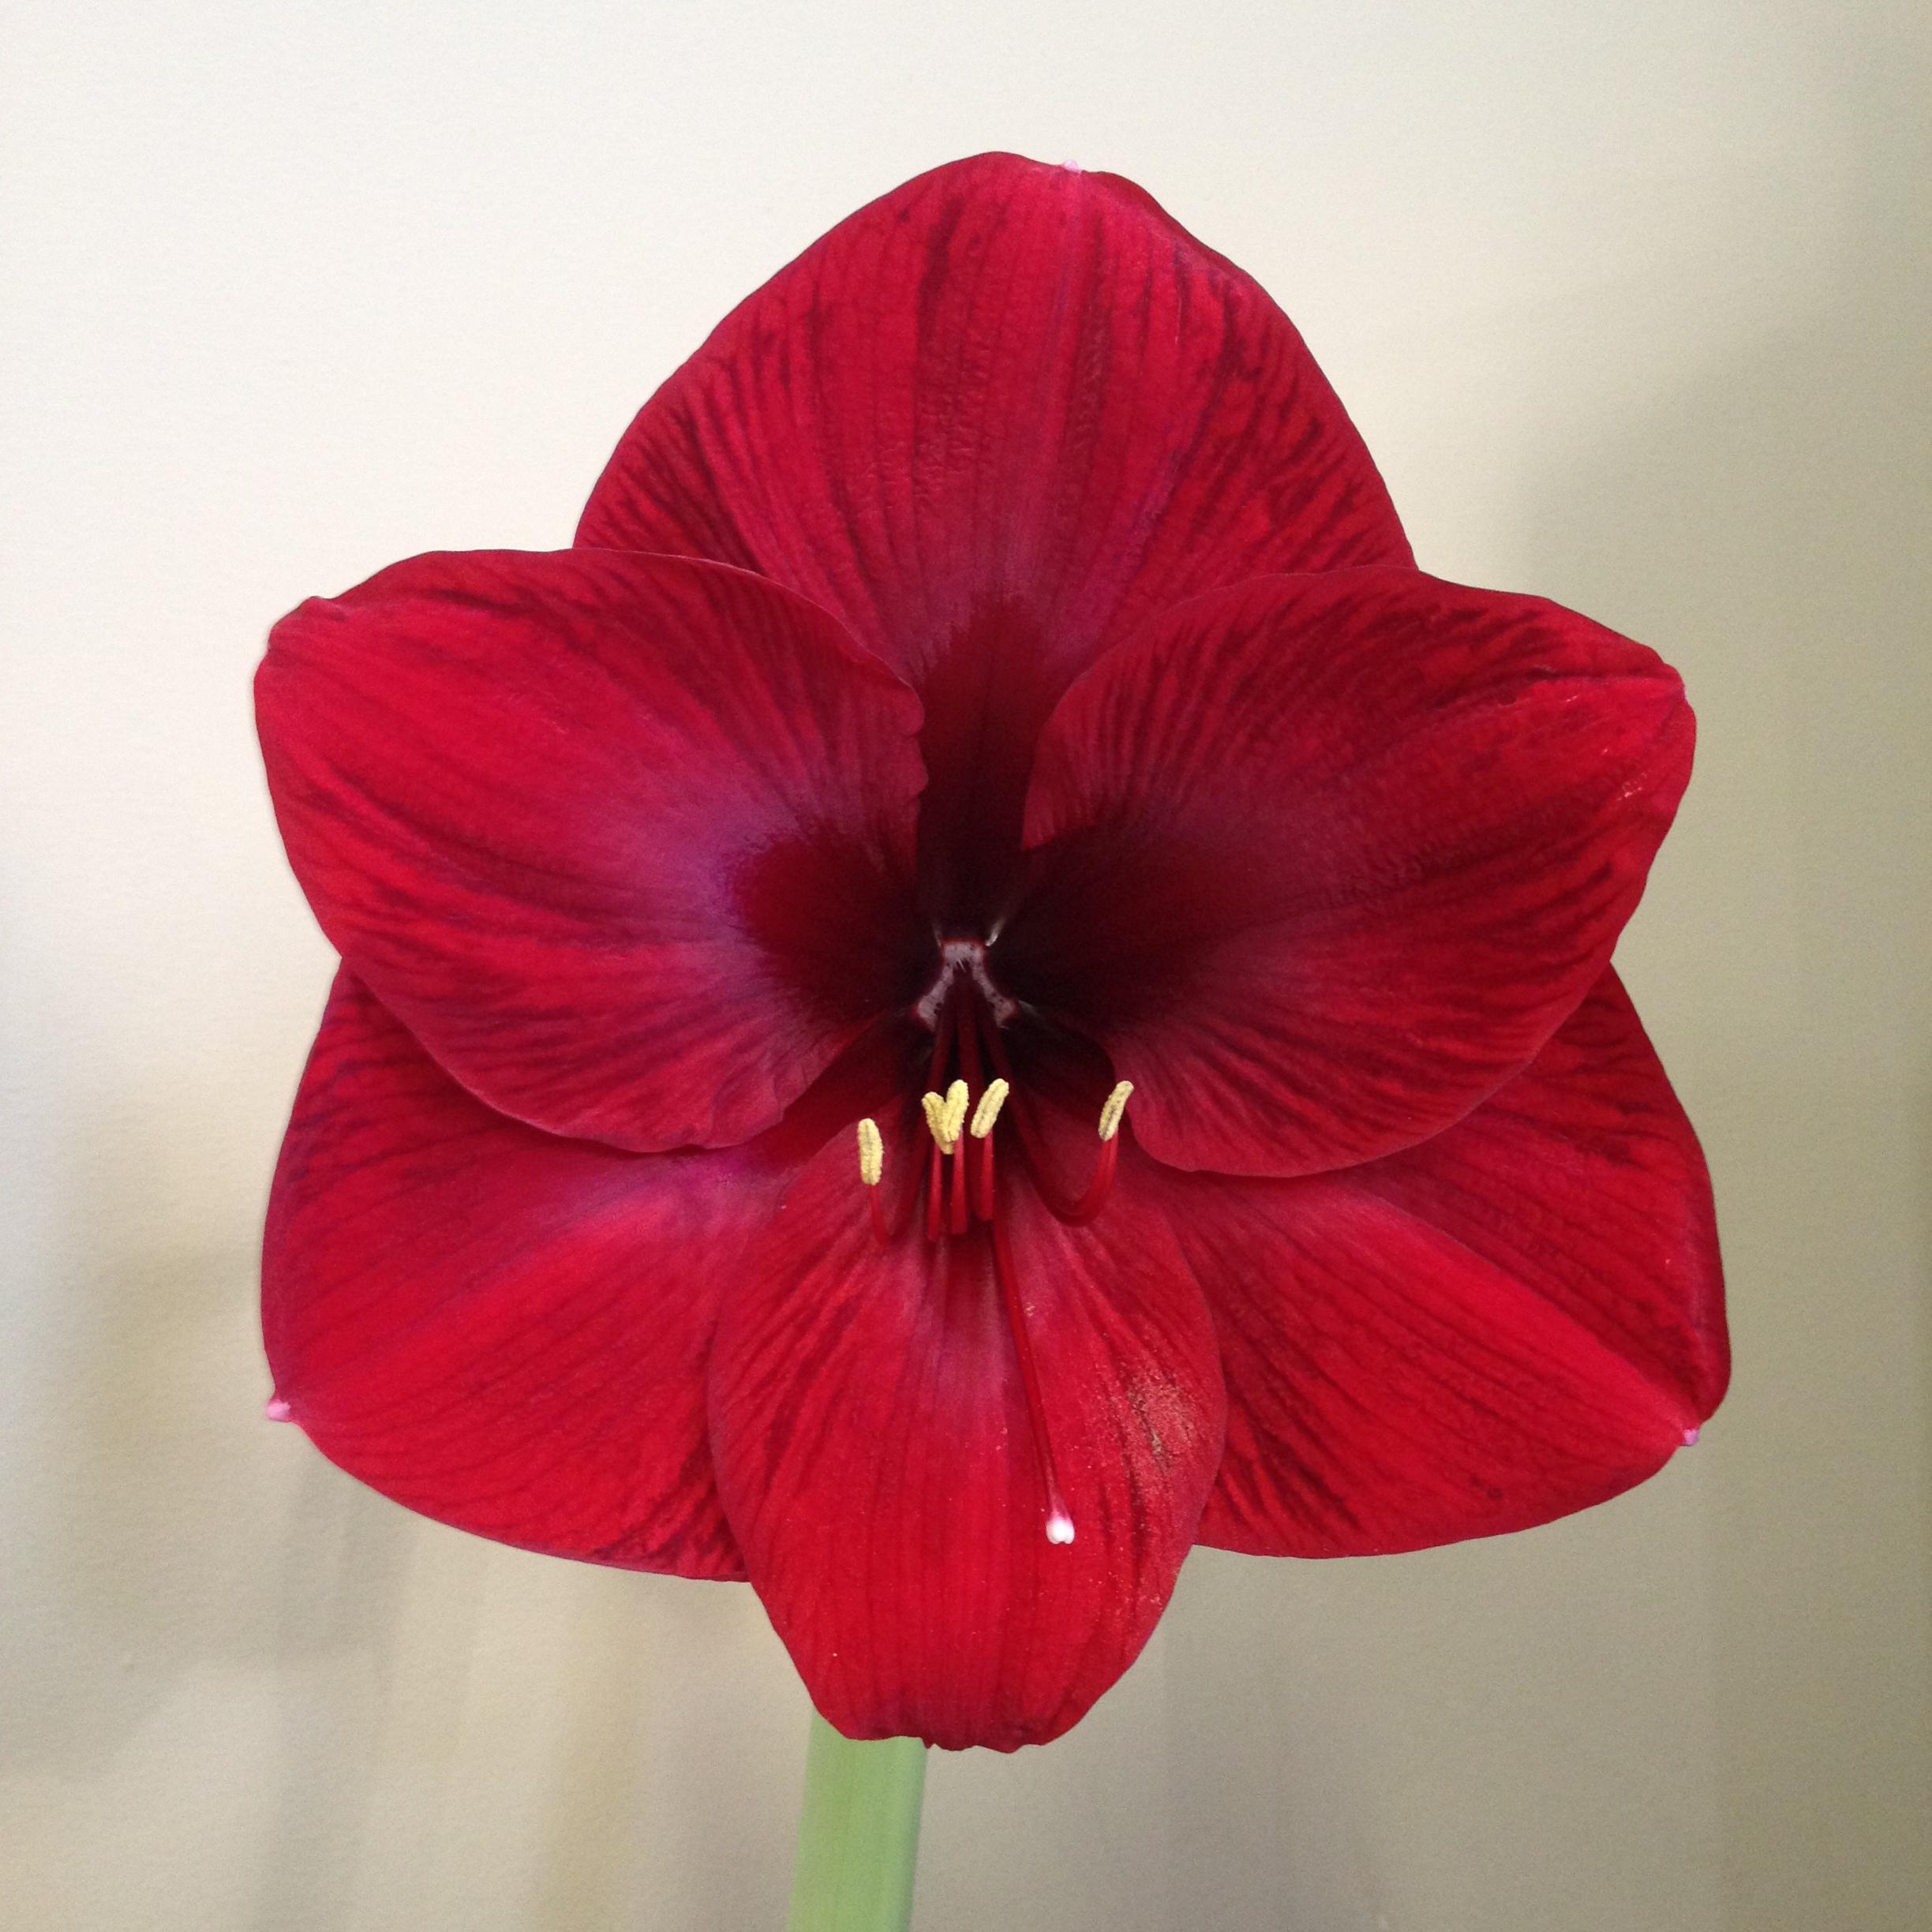 Hippeastrum Holland 'Grand Diva' - Amaryllis (Shipping begins Oct. 2021) from Leo Berbee Bulb Company